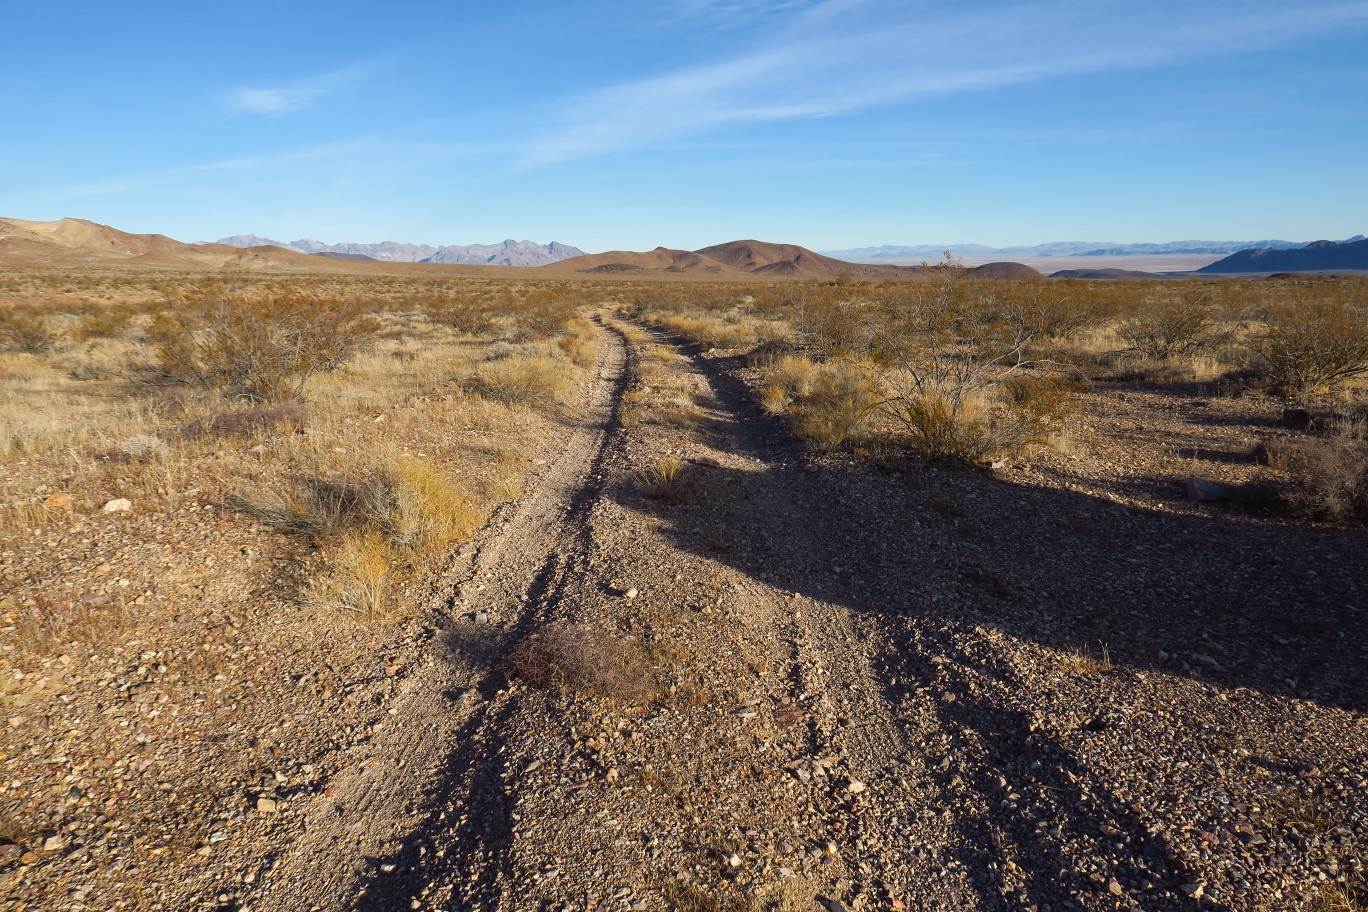 05-dirt_road_and_desert_scenery_from_trailhead